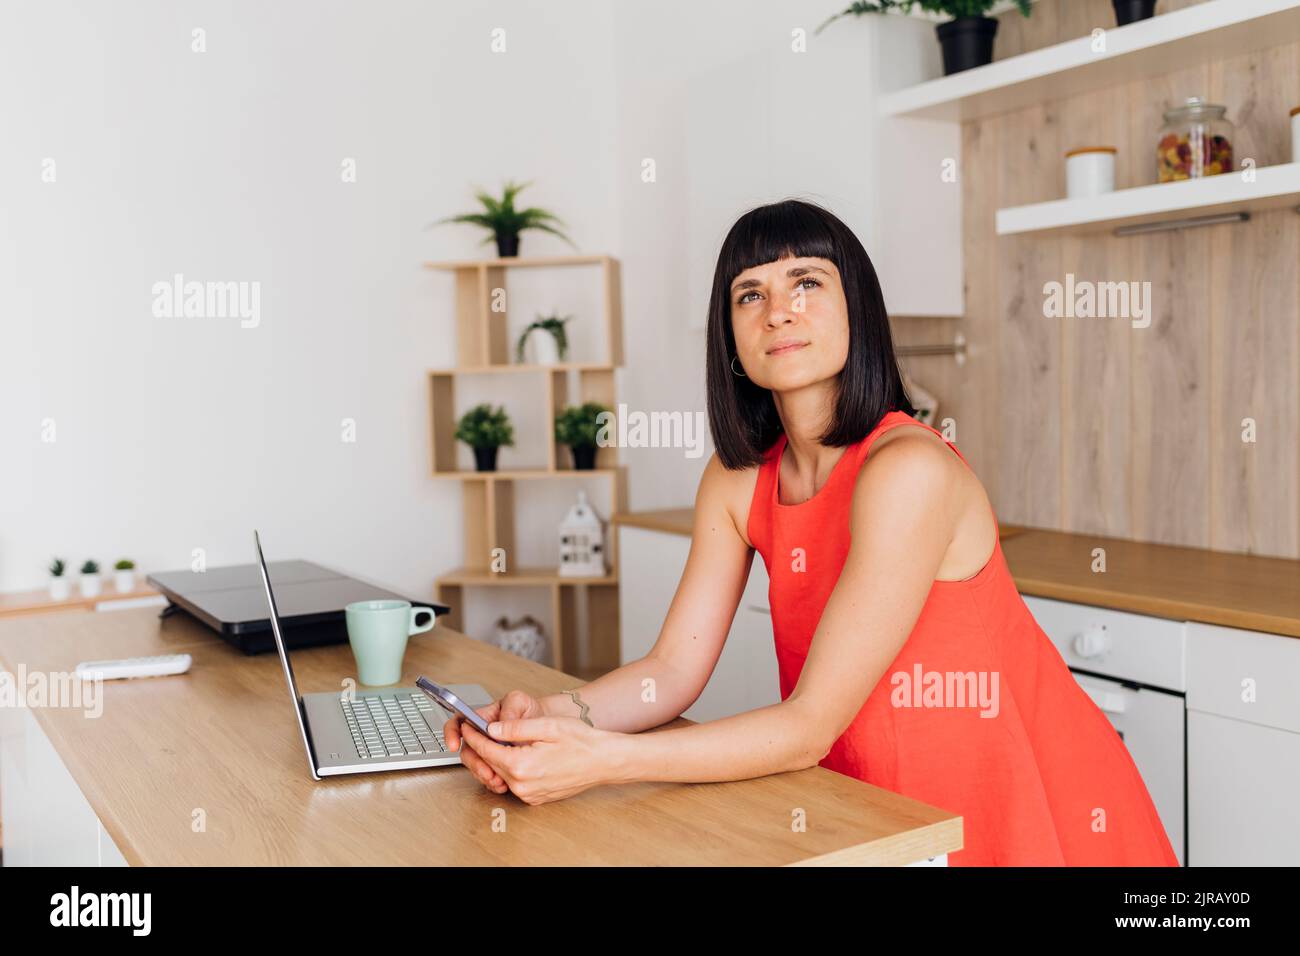 Contemplative woman with mobile phone and laptop standing at kitchen island Stock Photo